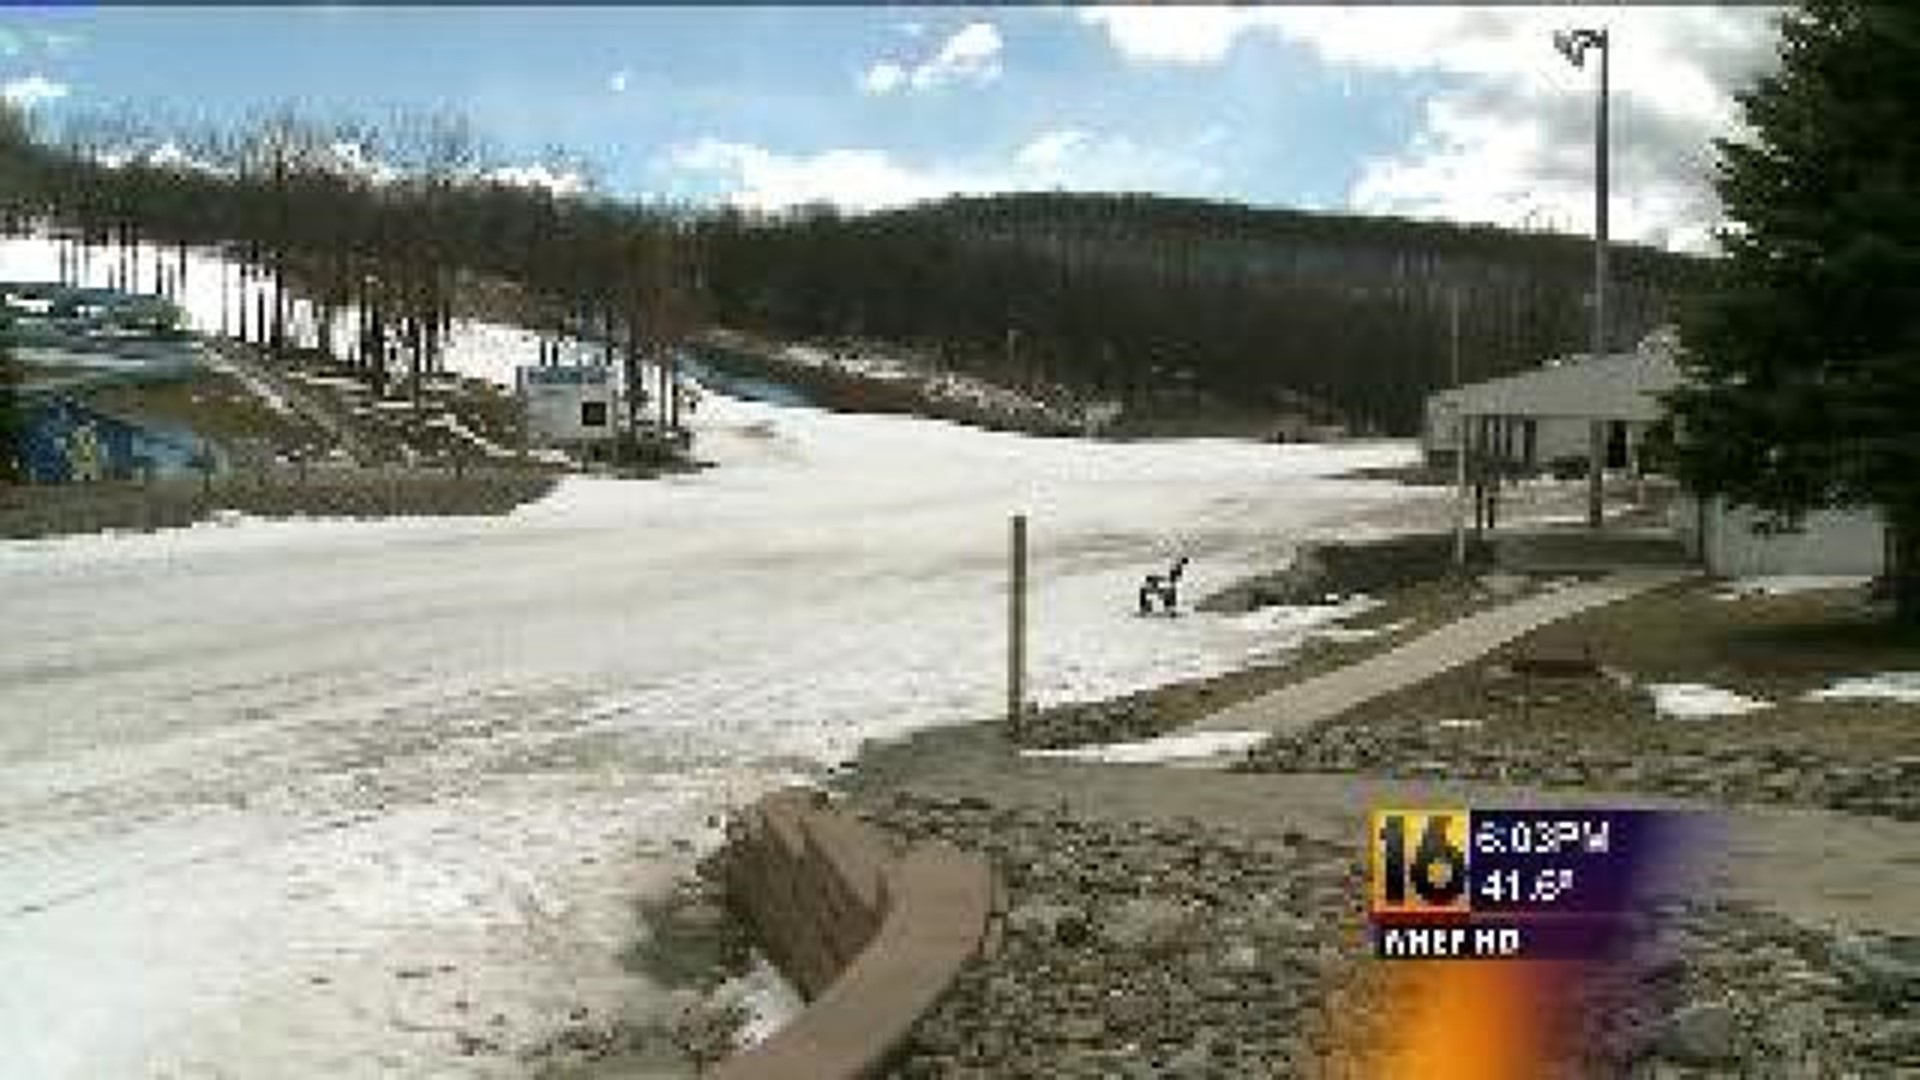 Deal in the Works to Buy Snö Mountain, Change Name